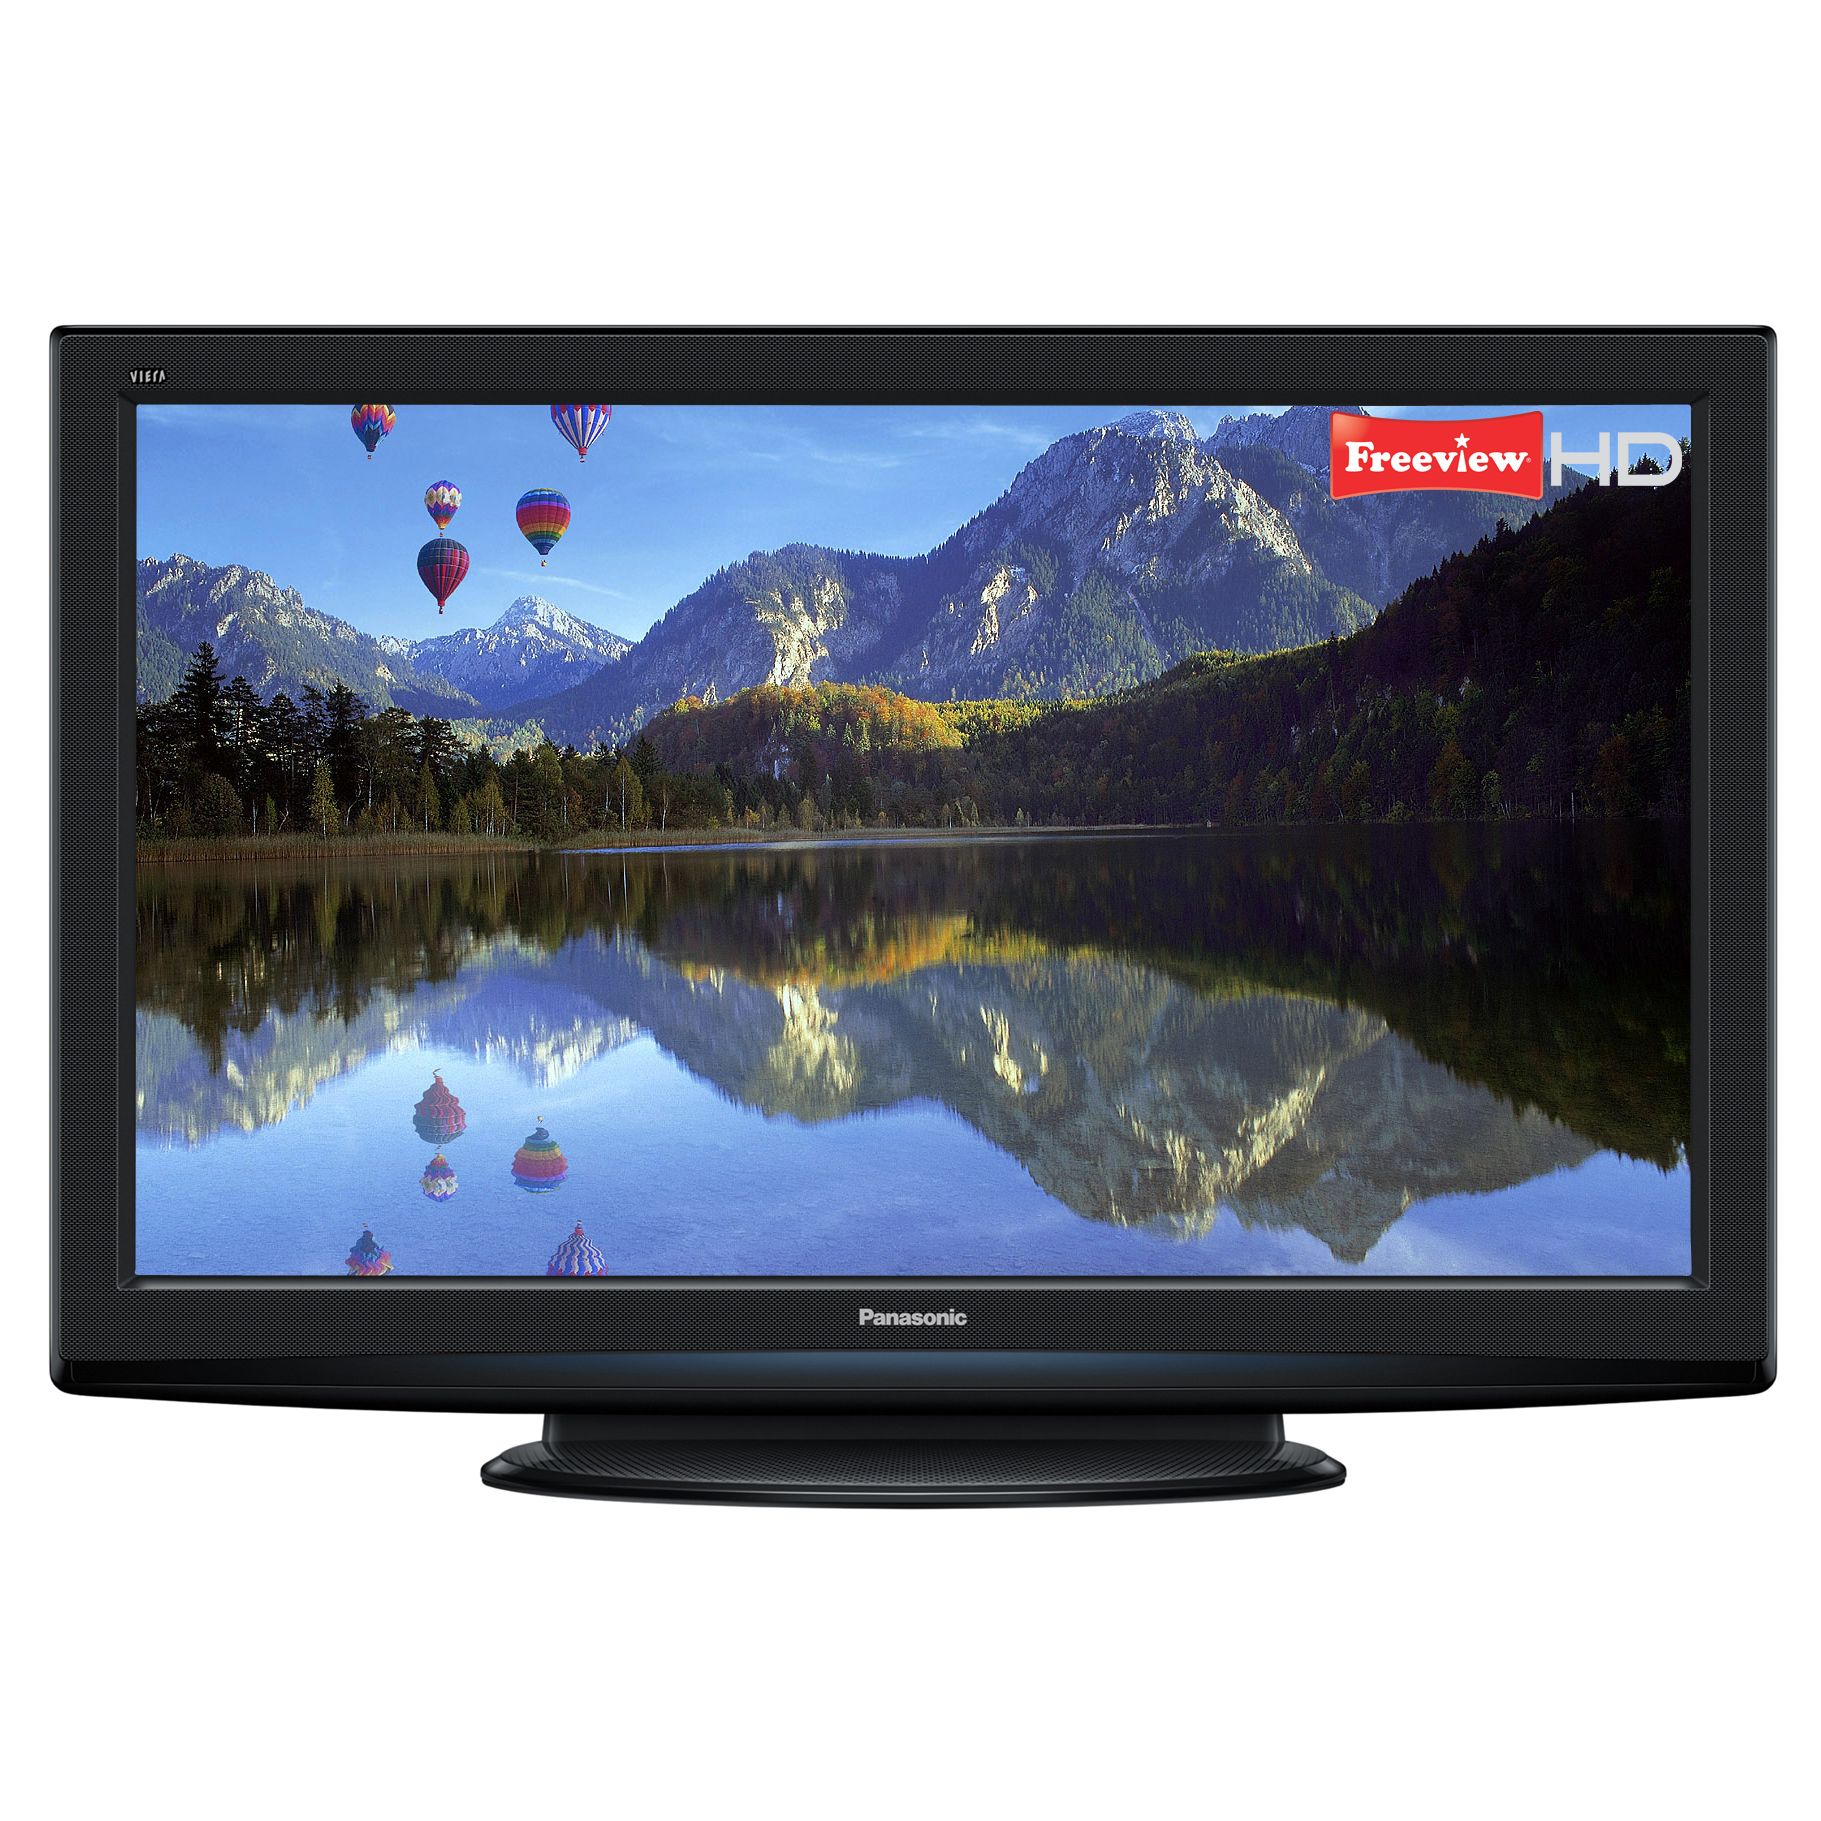 Panasonic Viera TX-P42S20B Plasma HD 1080p Digital Television, 42 Inch with Built-in Freeview HD at John Lewis